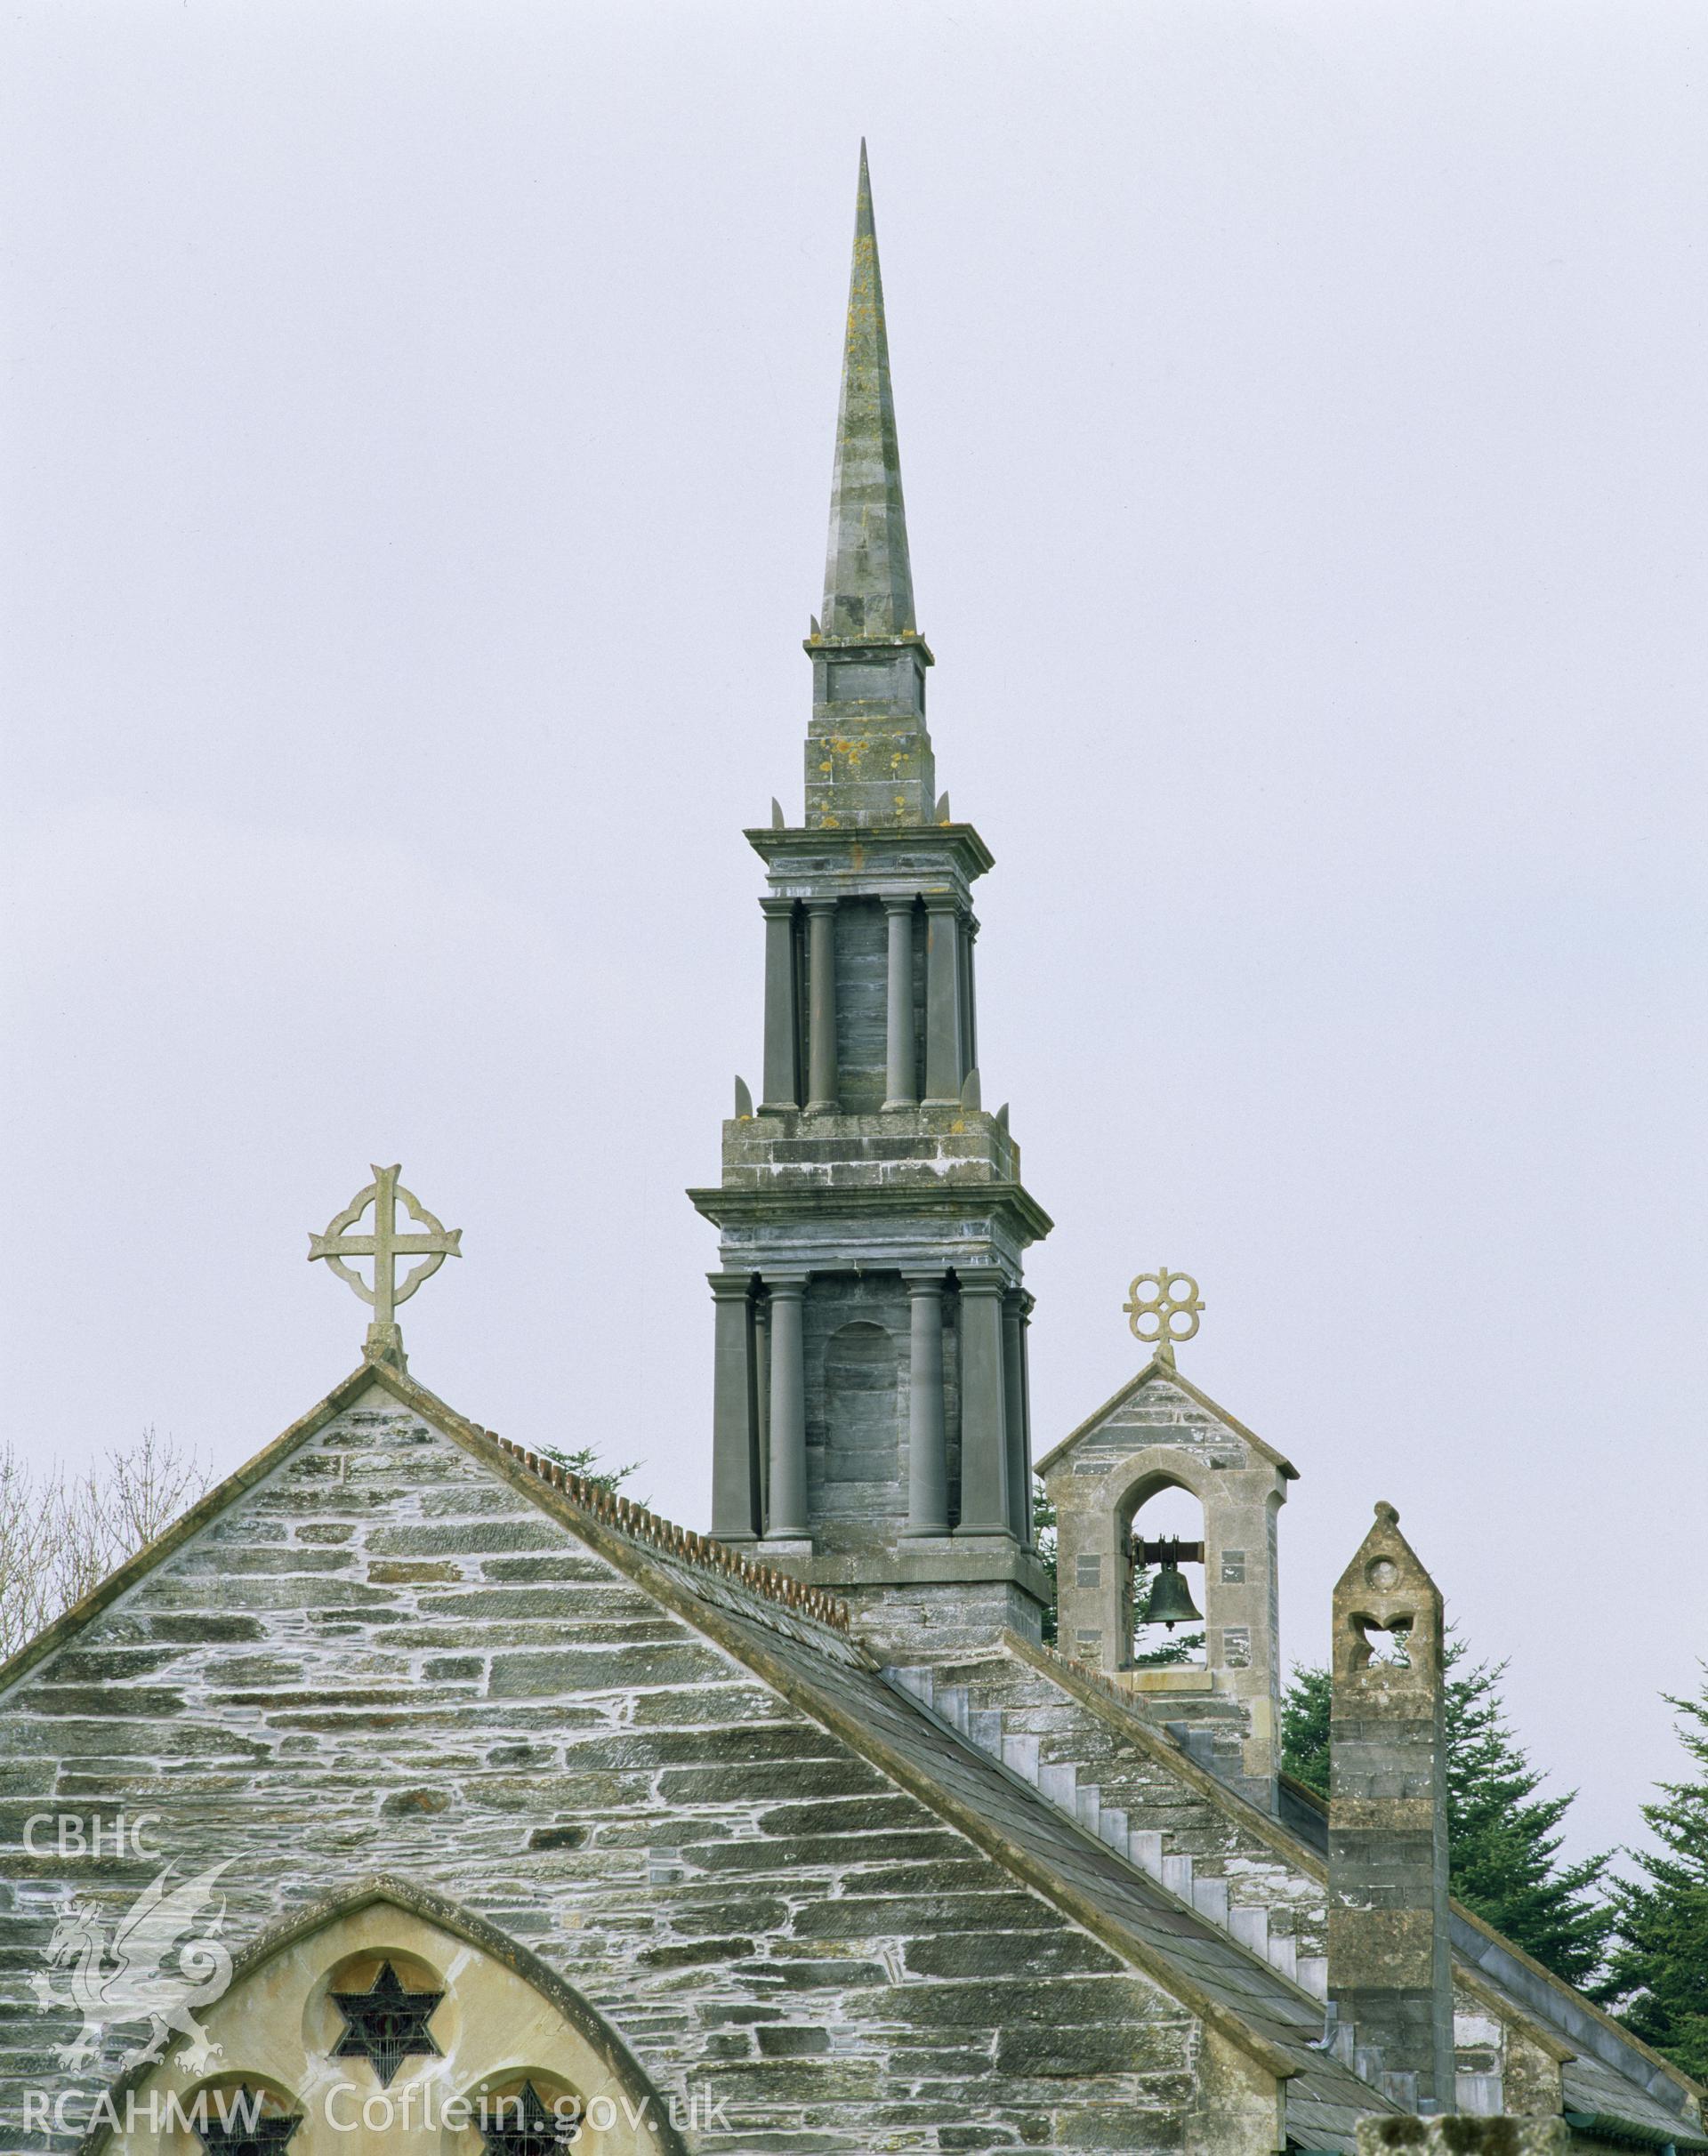 Colour transparency showing an exterior  view of the spire at St Cynllo's Church, Llangoedmor, produced by Iain Wright, June 2004.